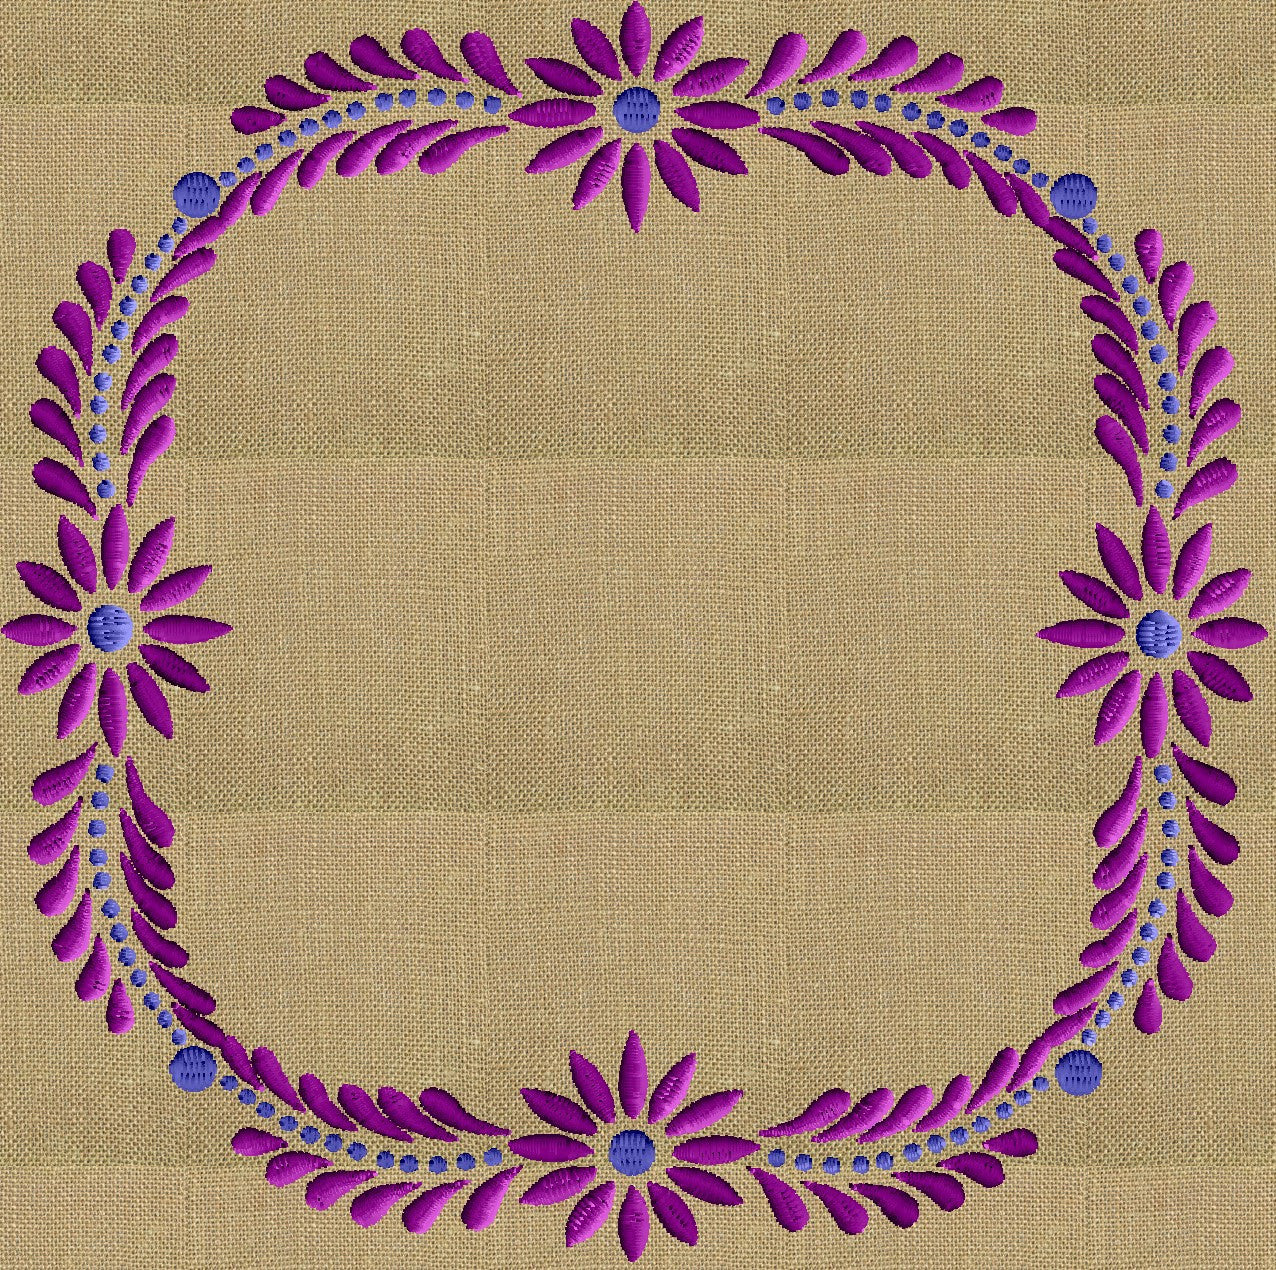 Daisy Dot Frame Design - EMBROIDERY DESIGN FILE - Instant download